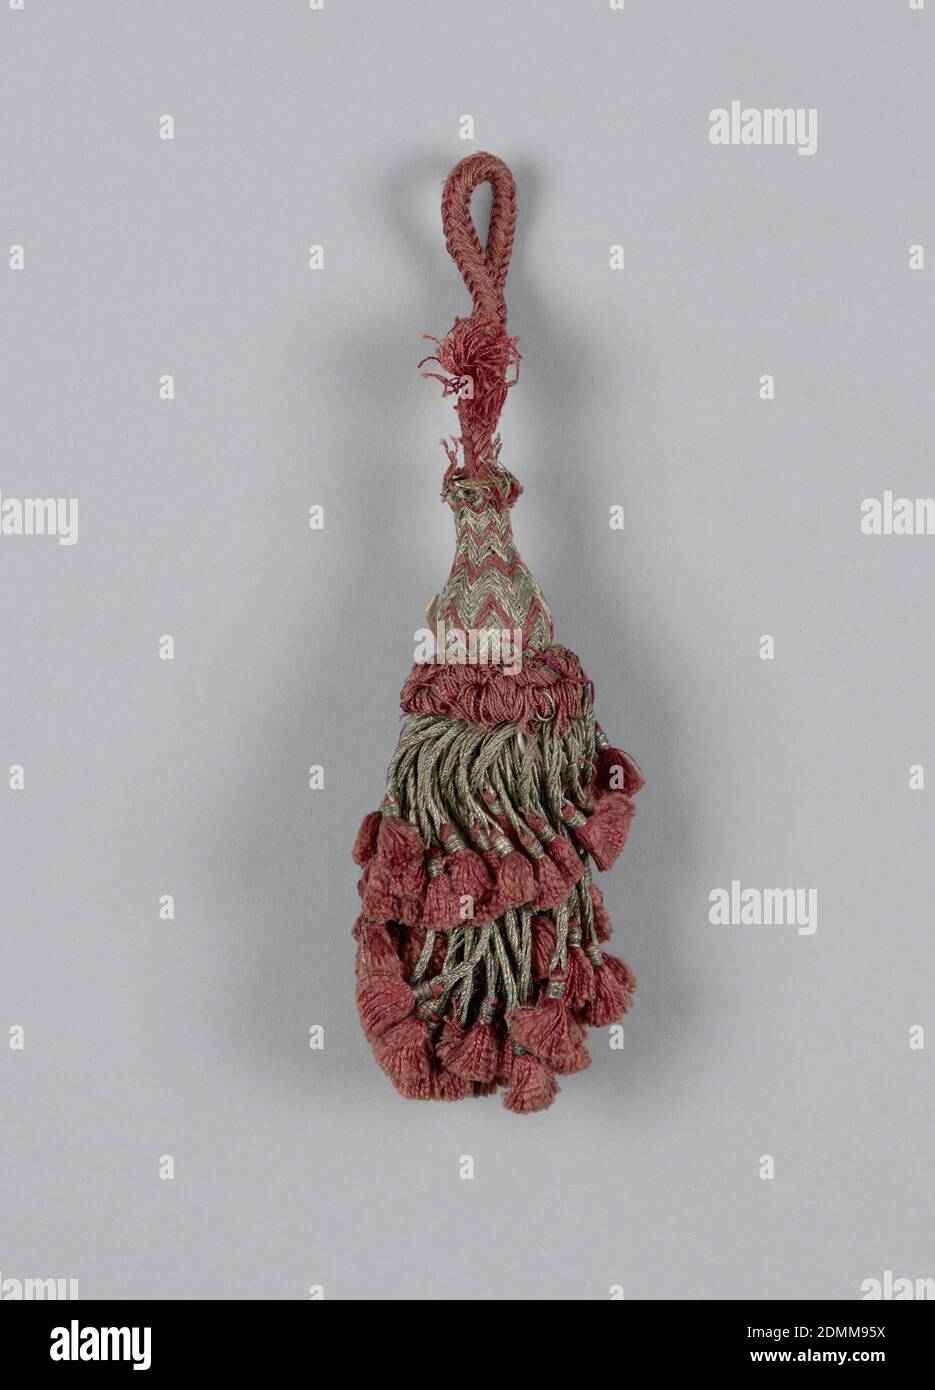 Tassel, Medium: silk, metal thread, wooden core, Skirt of silver threads in two lengths twisted and looped and supporting red silk tassels. Collar of red silk in loops. Head is vase-shaped and wrapped with red silk and silver threads in chevron pattern. Loop of red silk cord., Italy or Spain, 18th century, trimmings, Tassel Stock Photo